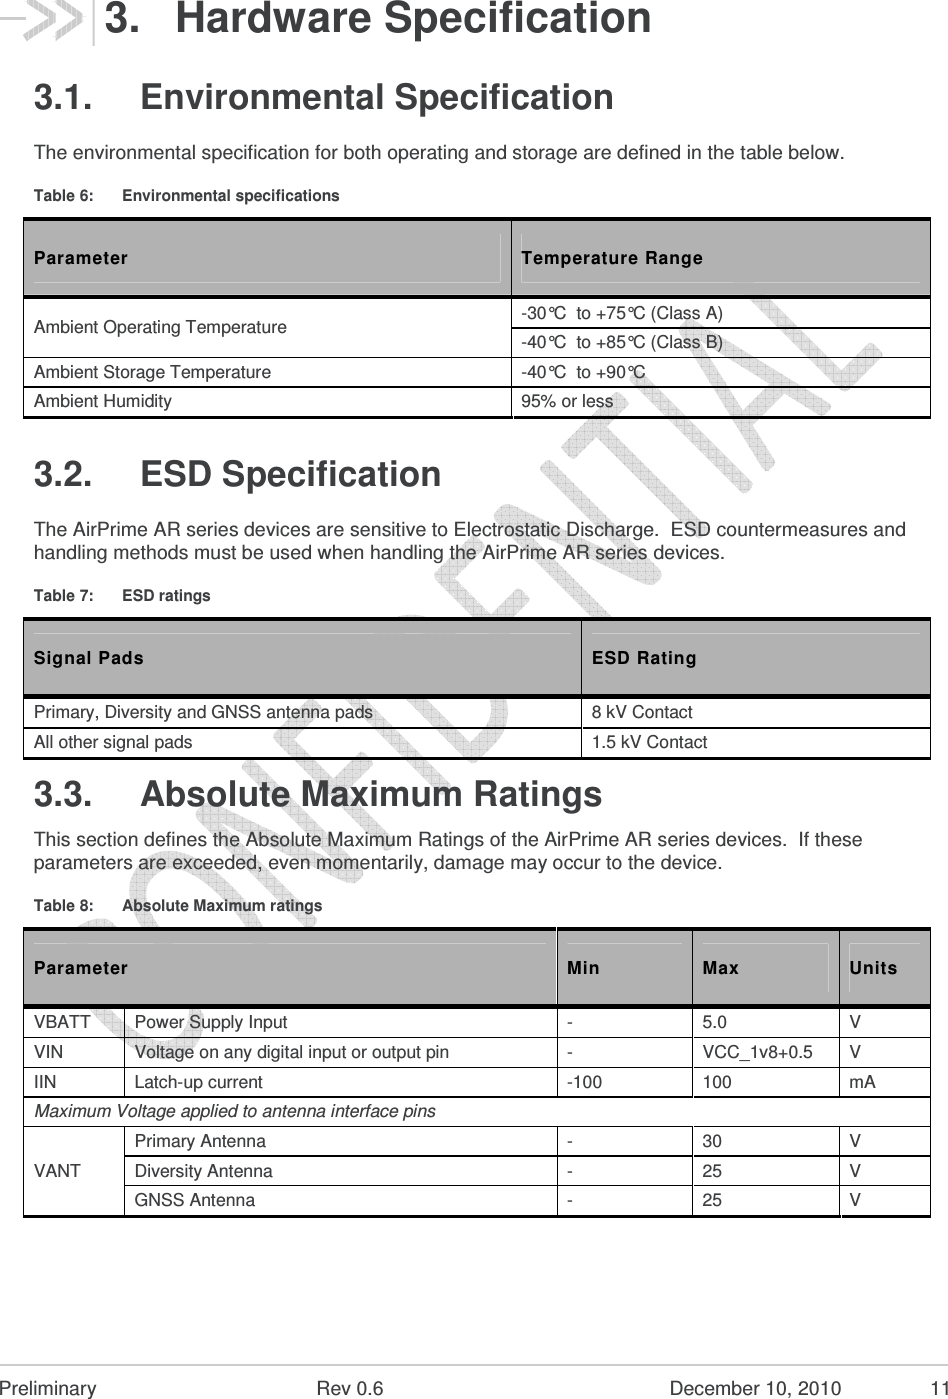  Preliminary  Rev 0.6  December 10, 2010  11 3.  Hardware Specification 3.1.  Environmental Specification The environmental specification for both operating and storage are defined in the table below. Table 6:  Environmental specifications Parameter  Temperature Range Ambient Operating Temperature  -30°C  to +75°C (Class A) -40°C  to +85°C (Class B) Ambient Storage Temperature  -40°C  to +90°C Ambient Humidity  95% or less 3.2.  ESD Specification The AirPrime AR series devices are sensitive to Electrostatic Discharge.  ESD countermeasures and handling methods must be used when handling the AirPrime AR series devices. Table 7:  ESD ratings Signal Pads  ESD Rating Primary, Diversity and GNSS antenna pads  8 kV Contact All other signal pads  1.5 kV Contact 3.3.  Absolute Maximum Ratings This section defines the Absolute Maximum Ratings of the AirPrime AR series devices.  If these parameters are exceeded, even momentarily, damage may occur to the device. Table 8:  Absolute Maximum ratings Parameter  Min  Max  Units VBATT  Power Supply Input  -  5.0  V VIN  Voltage on any digital input or output pin  -  VCC_1v8+0.5  V IIN  Latch-up current  -100  100  mA Maximum Voltage applied to antenna interface pins VANT Primary Antenna  -  30  V Diversity Antenna  -  25  V GNSS Antenna  -  25  V 